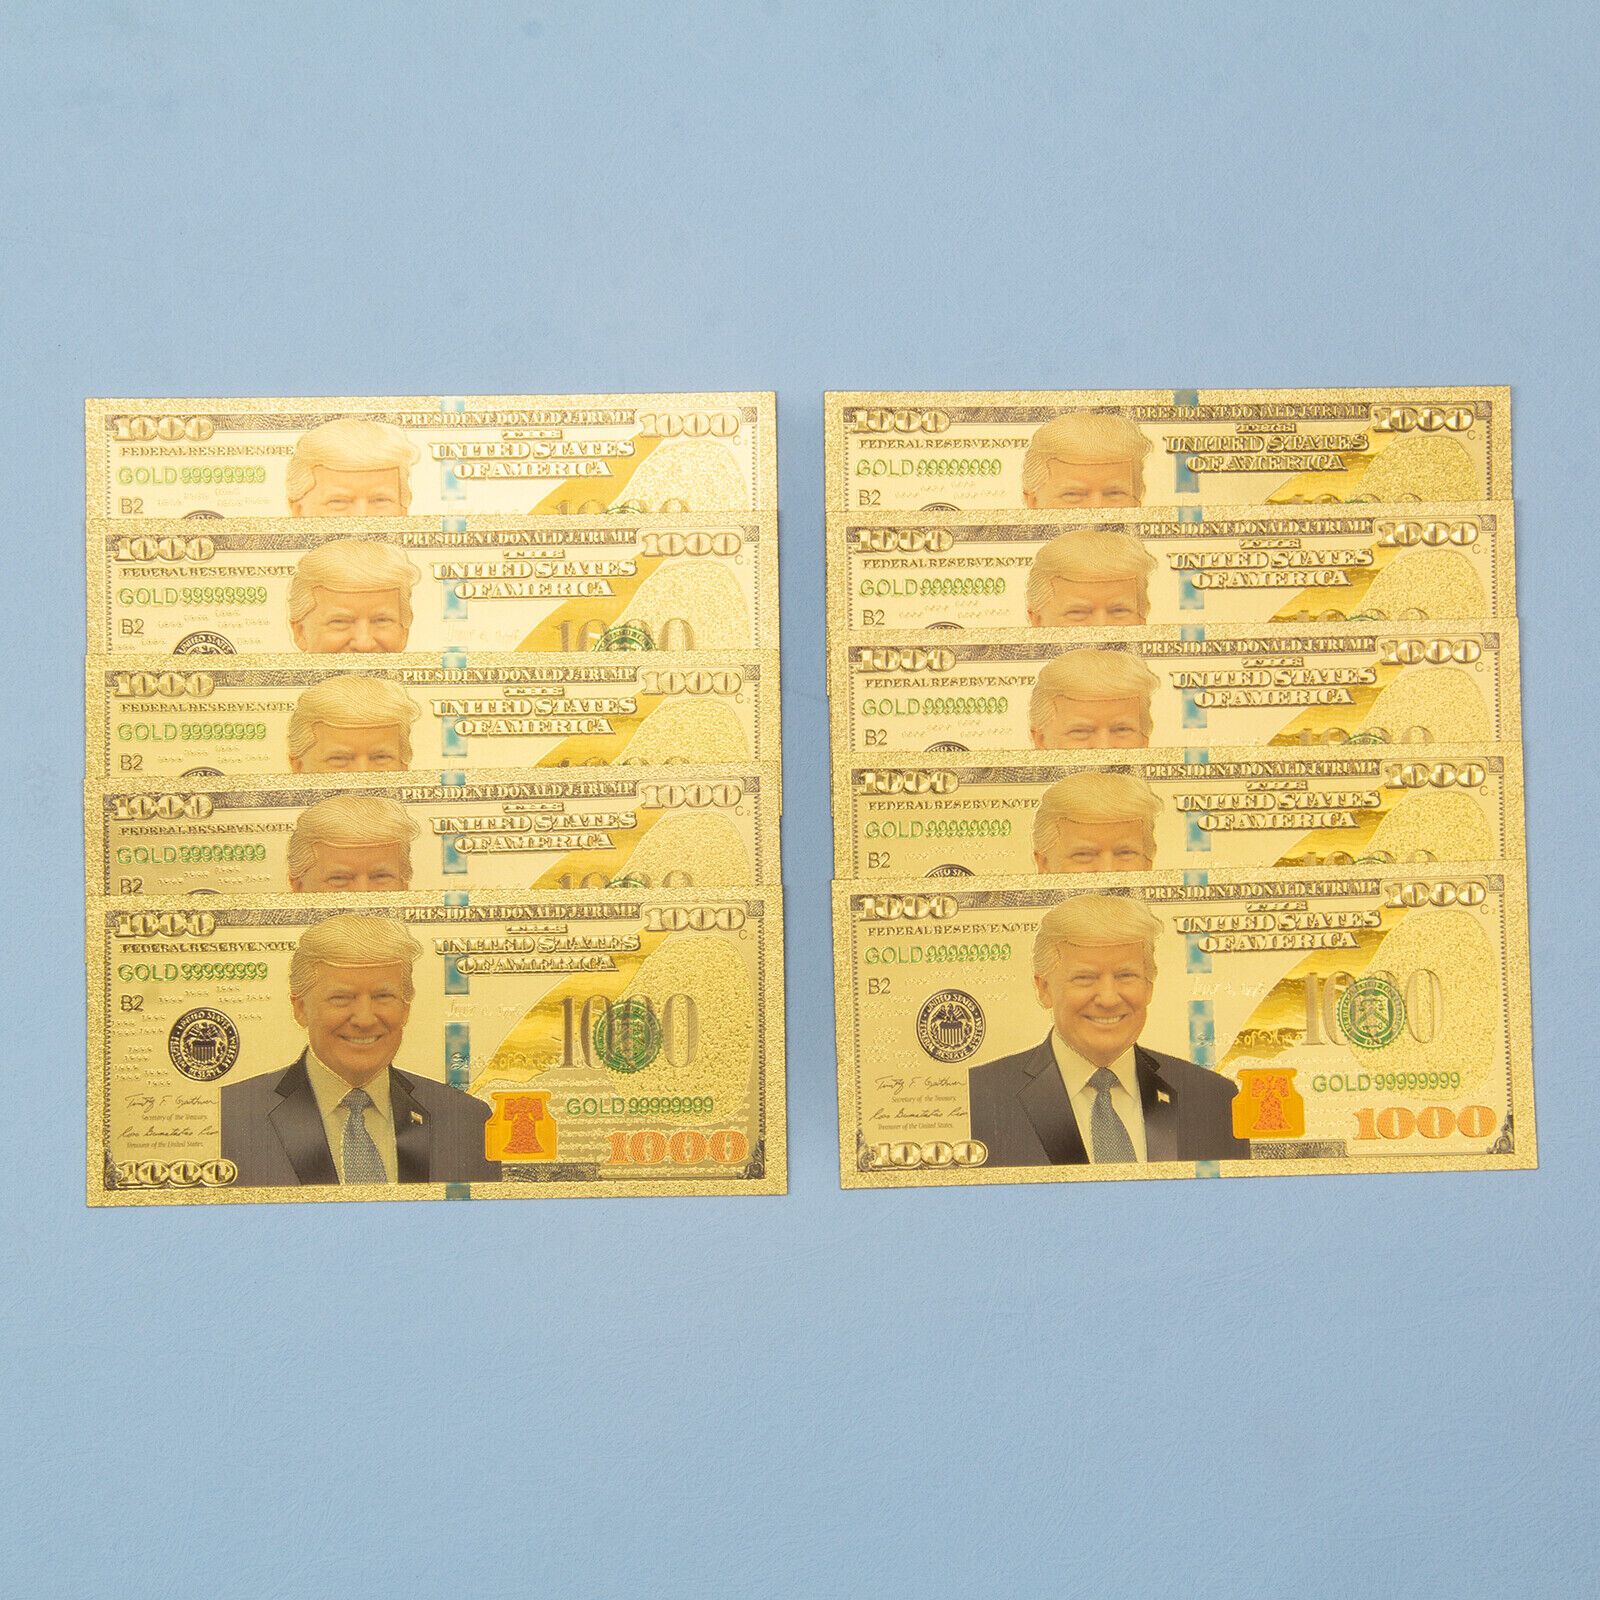 10 X 1000 Dollar Donald Trump Money Gold Foil Banknote Novelty COLLECTION US